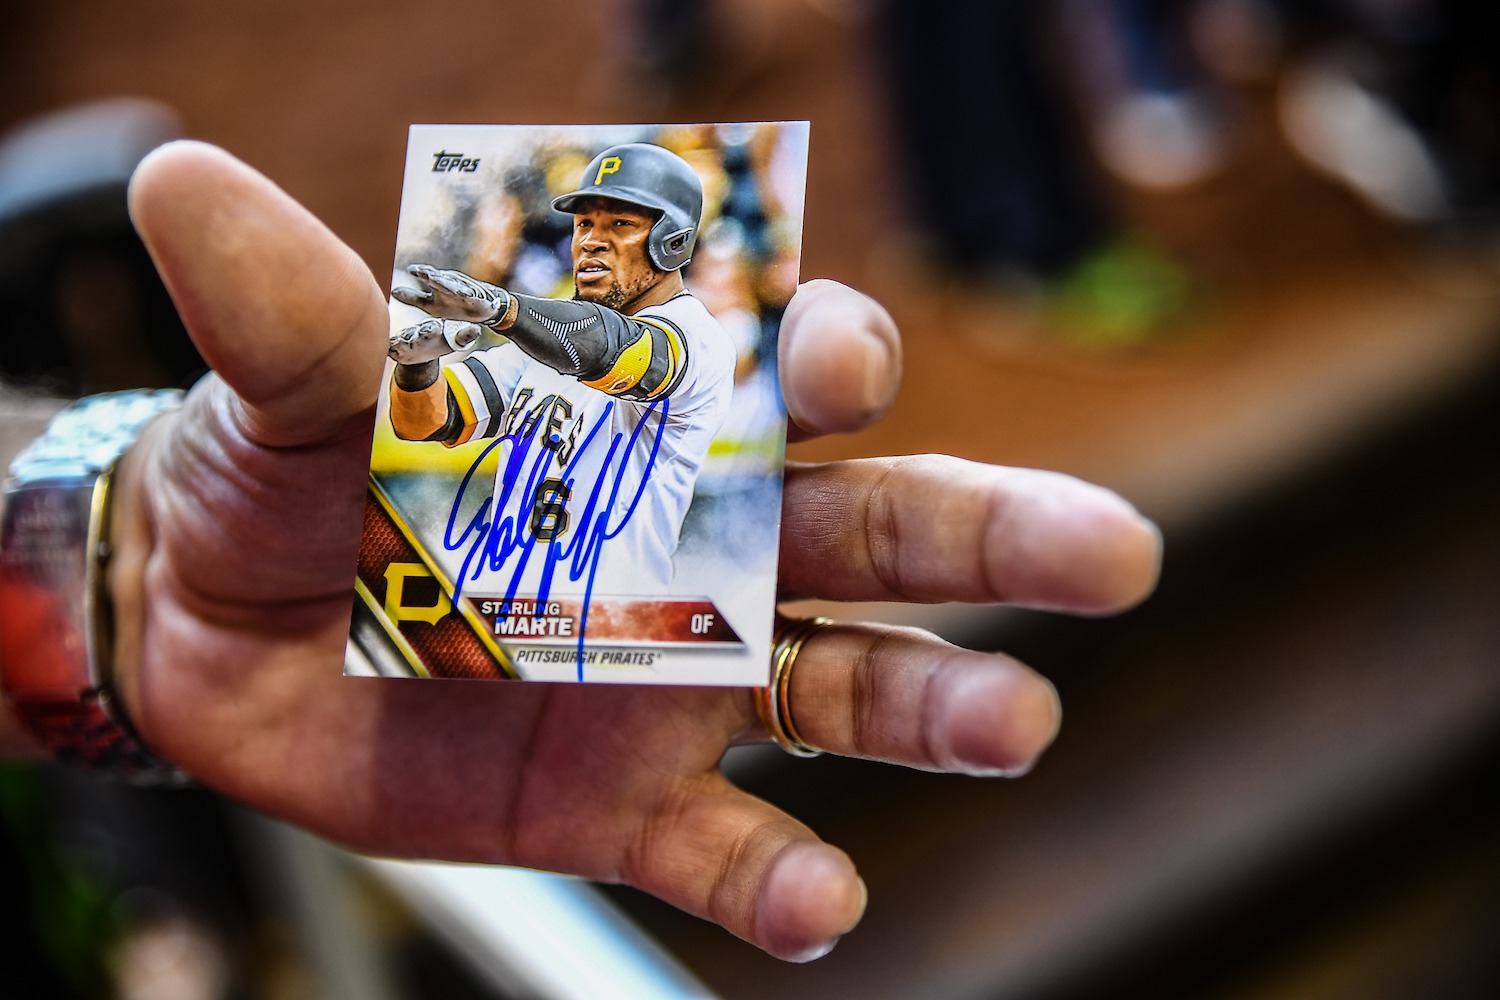 Giant Topps lancia la serie 2 della collezione NFT della MLB  - Topps the American collectibles giant that also produces Bazooka chewing gum and candy has announced the launch of the second series 2021 Topps Baseball NFT collection